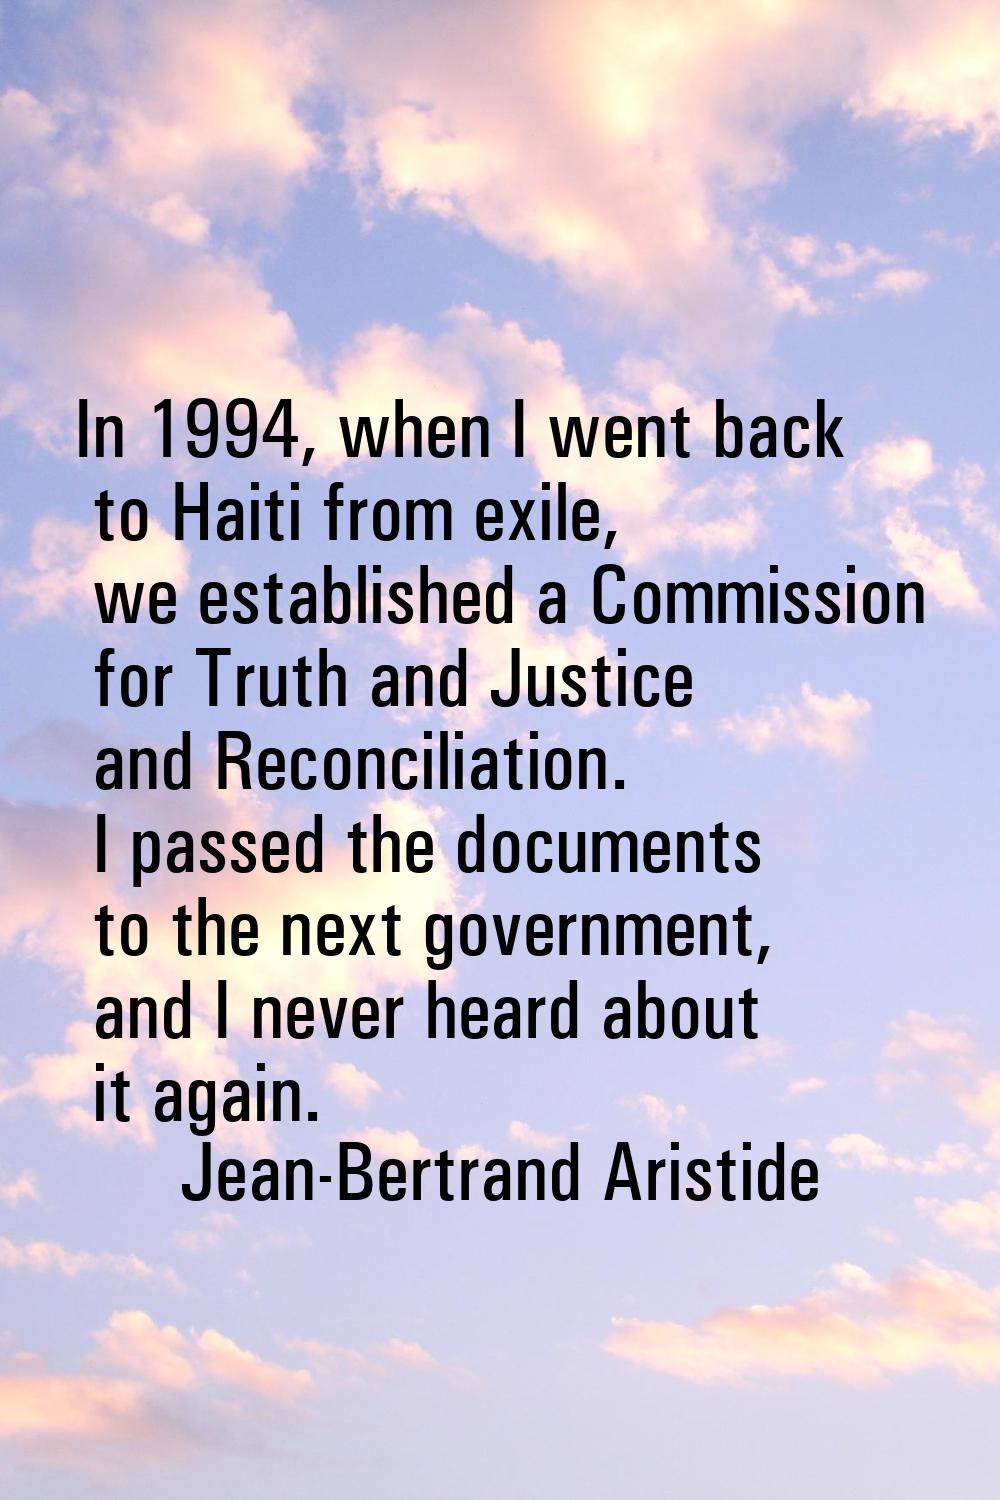 In 1994, when I went back to Haiti from exile, we established a Commission for Truth and Justice an